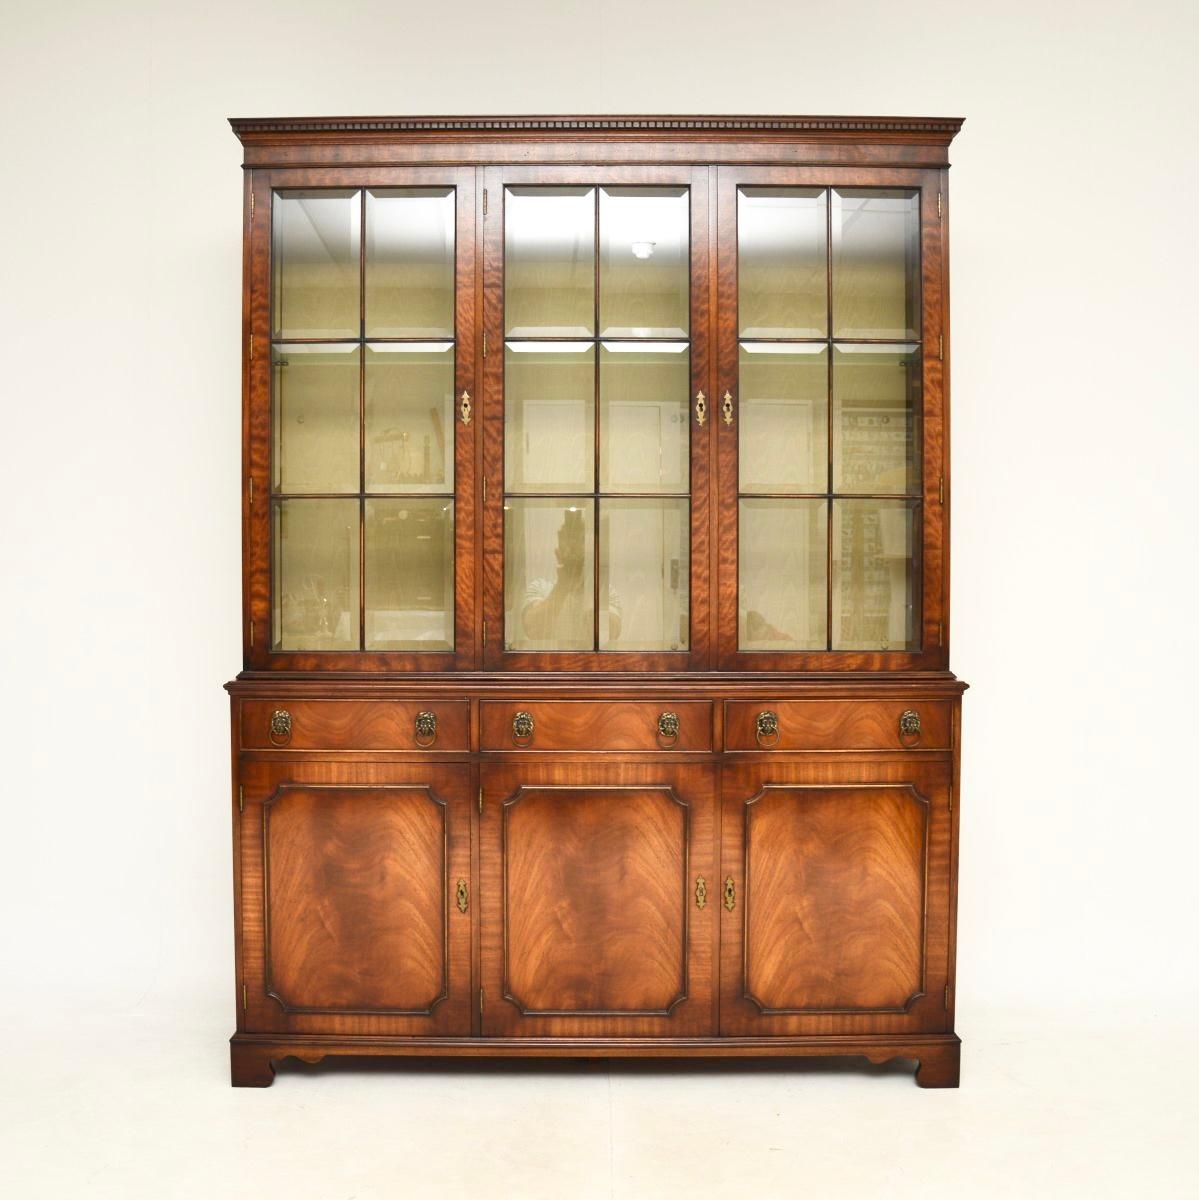 A handsome and top quality large antique Georgian style bookcase. This dates from around the 1950’s.

It is beautifully made, with gorgeous veneers. There is a lovely astral glaze design on the glass door fronts and the glass is even beveled. The